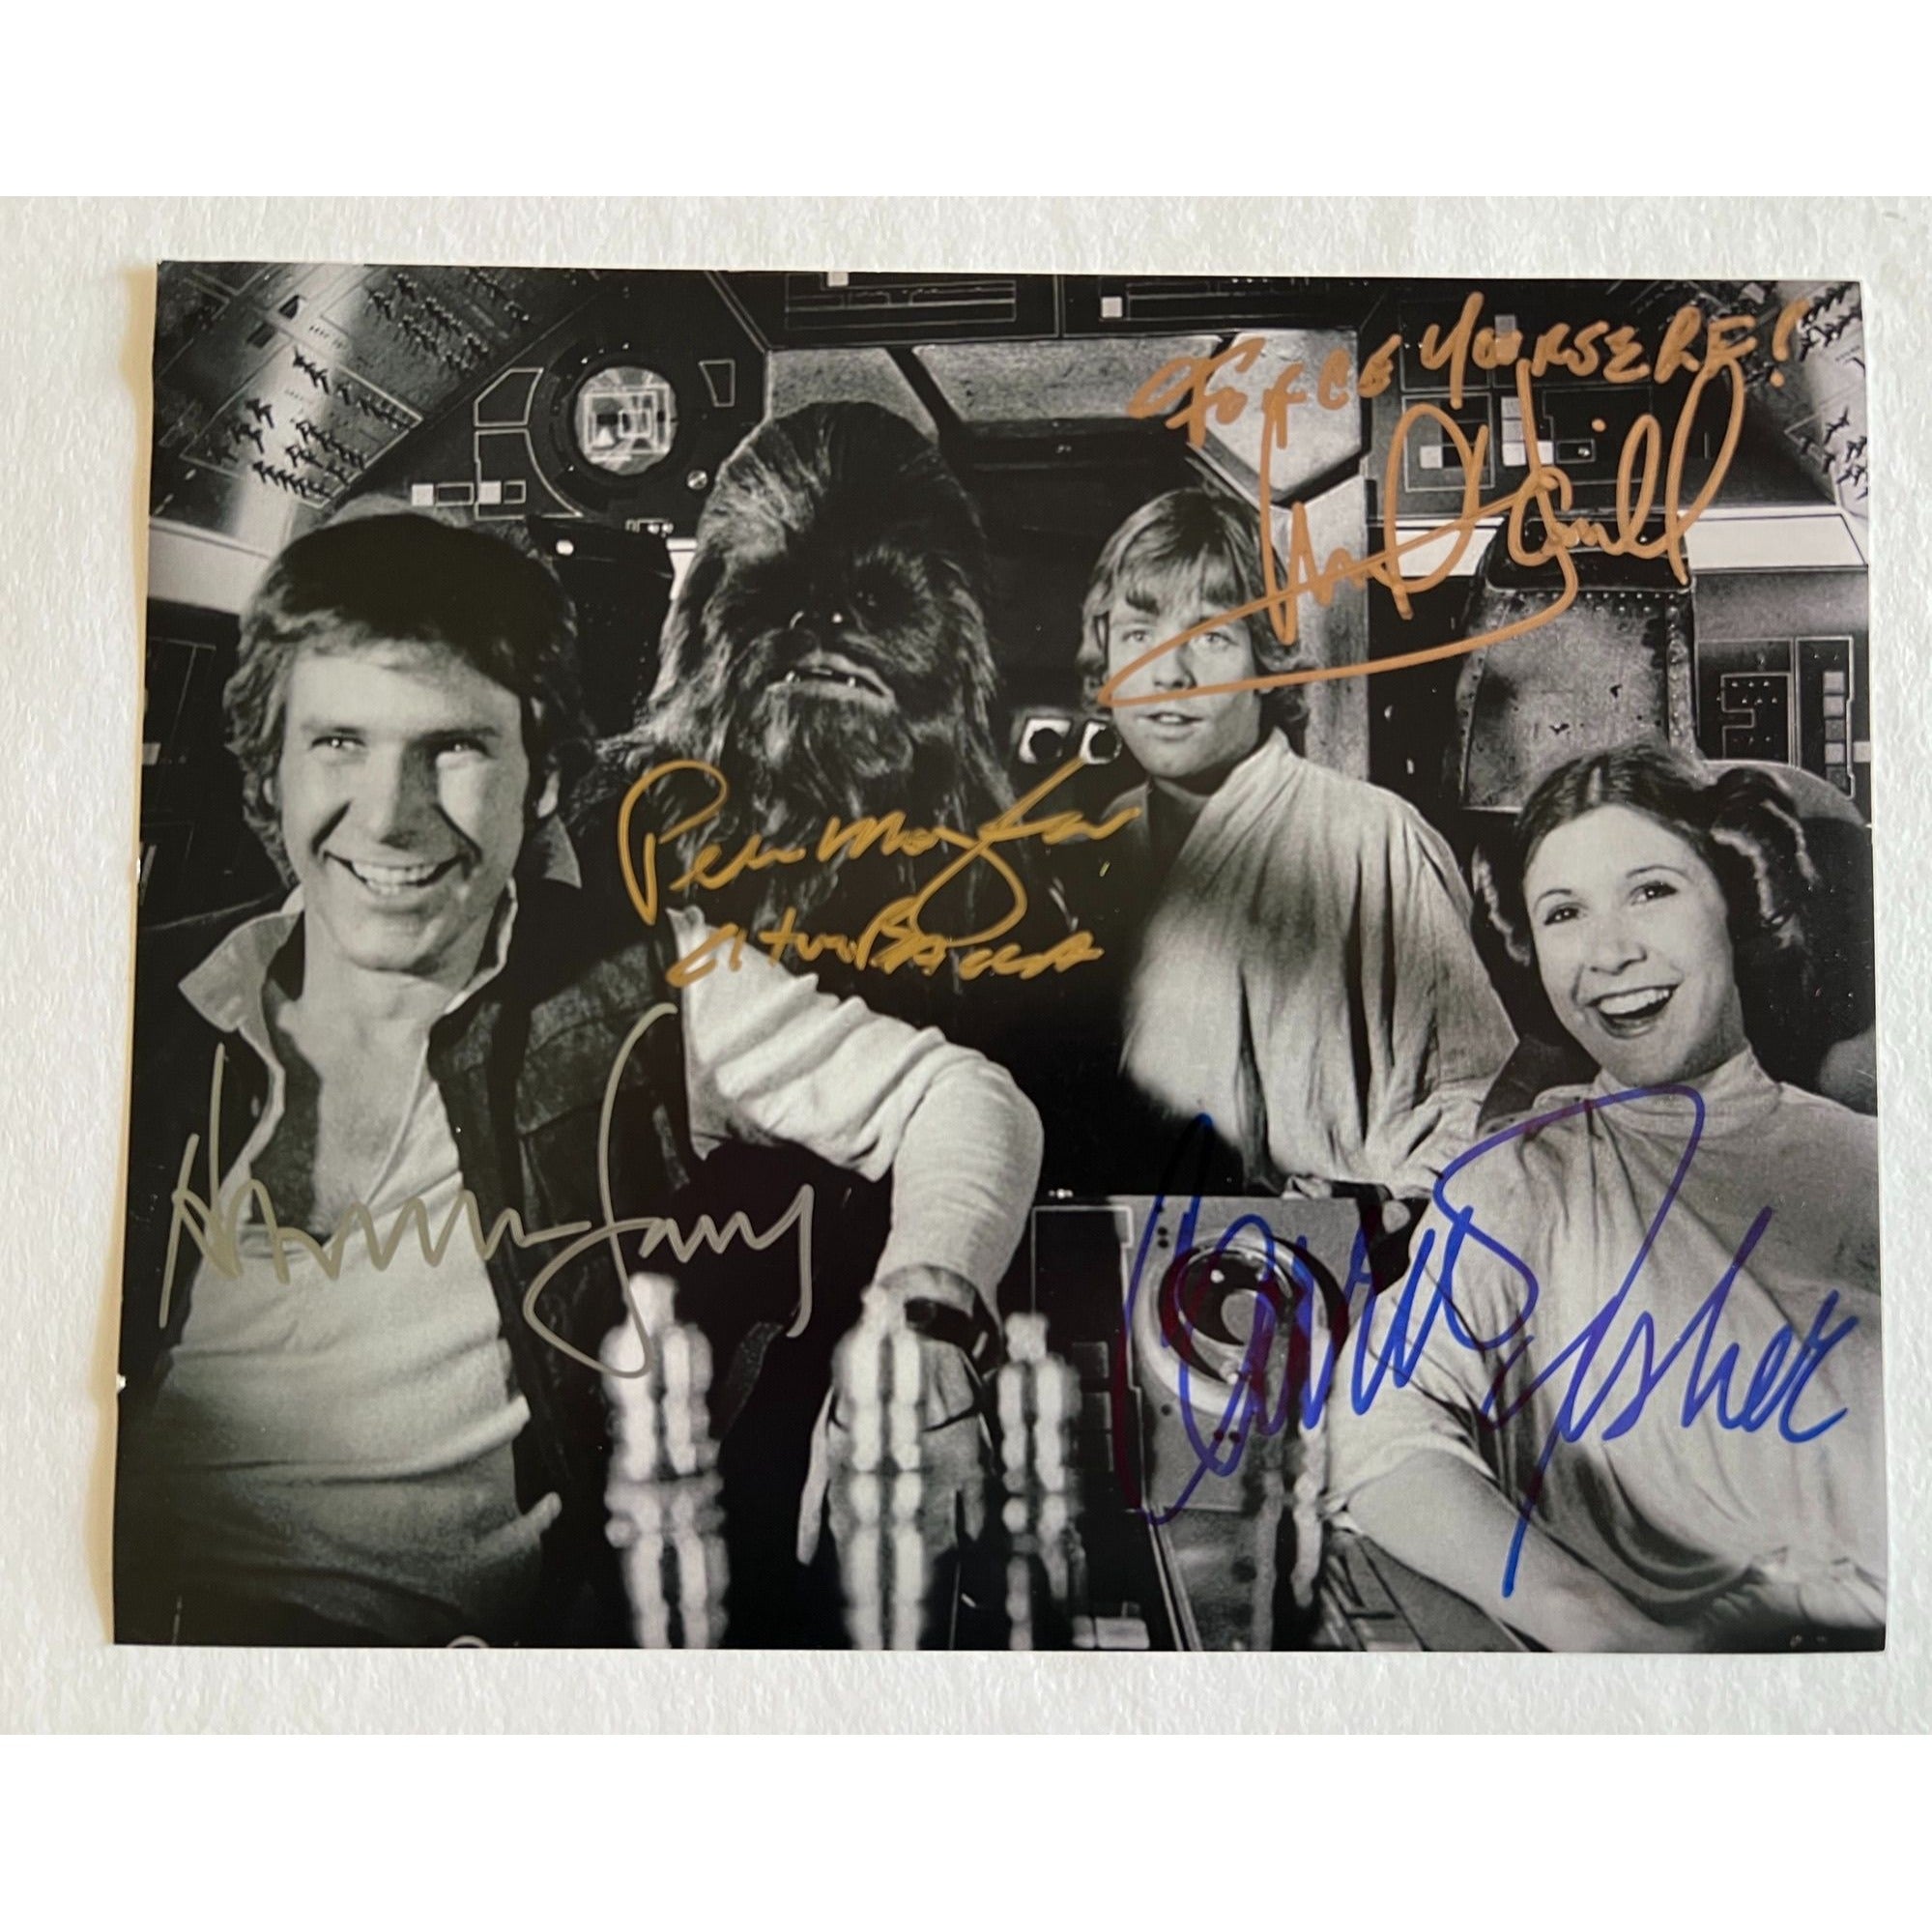 Star Wars Harrison Ford Mark Hamell Carrie Fisher and Peter Mayhew 8x10 photo signed with proof